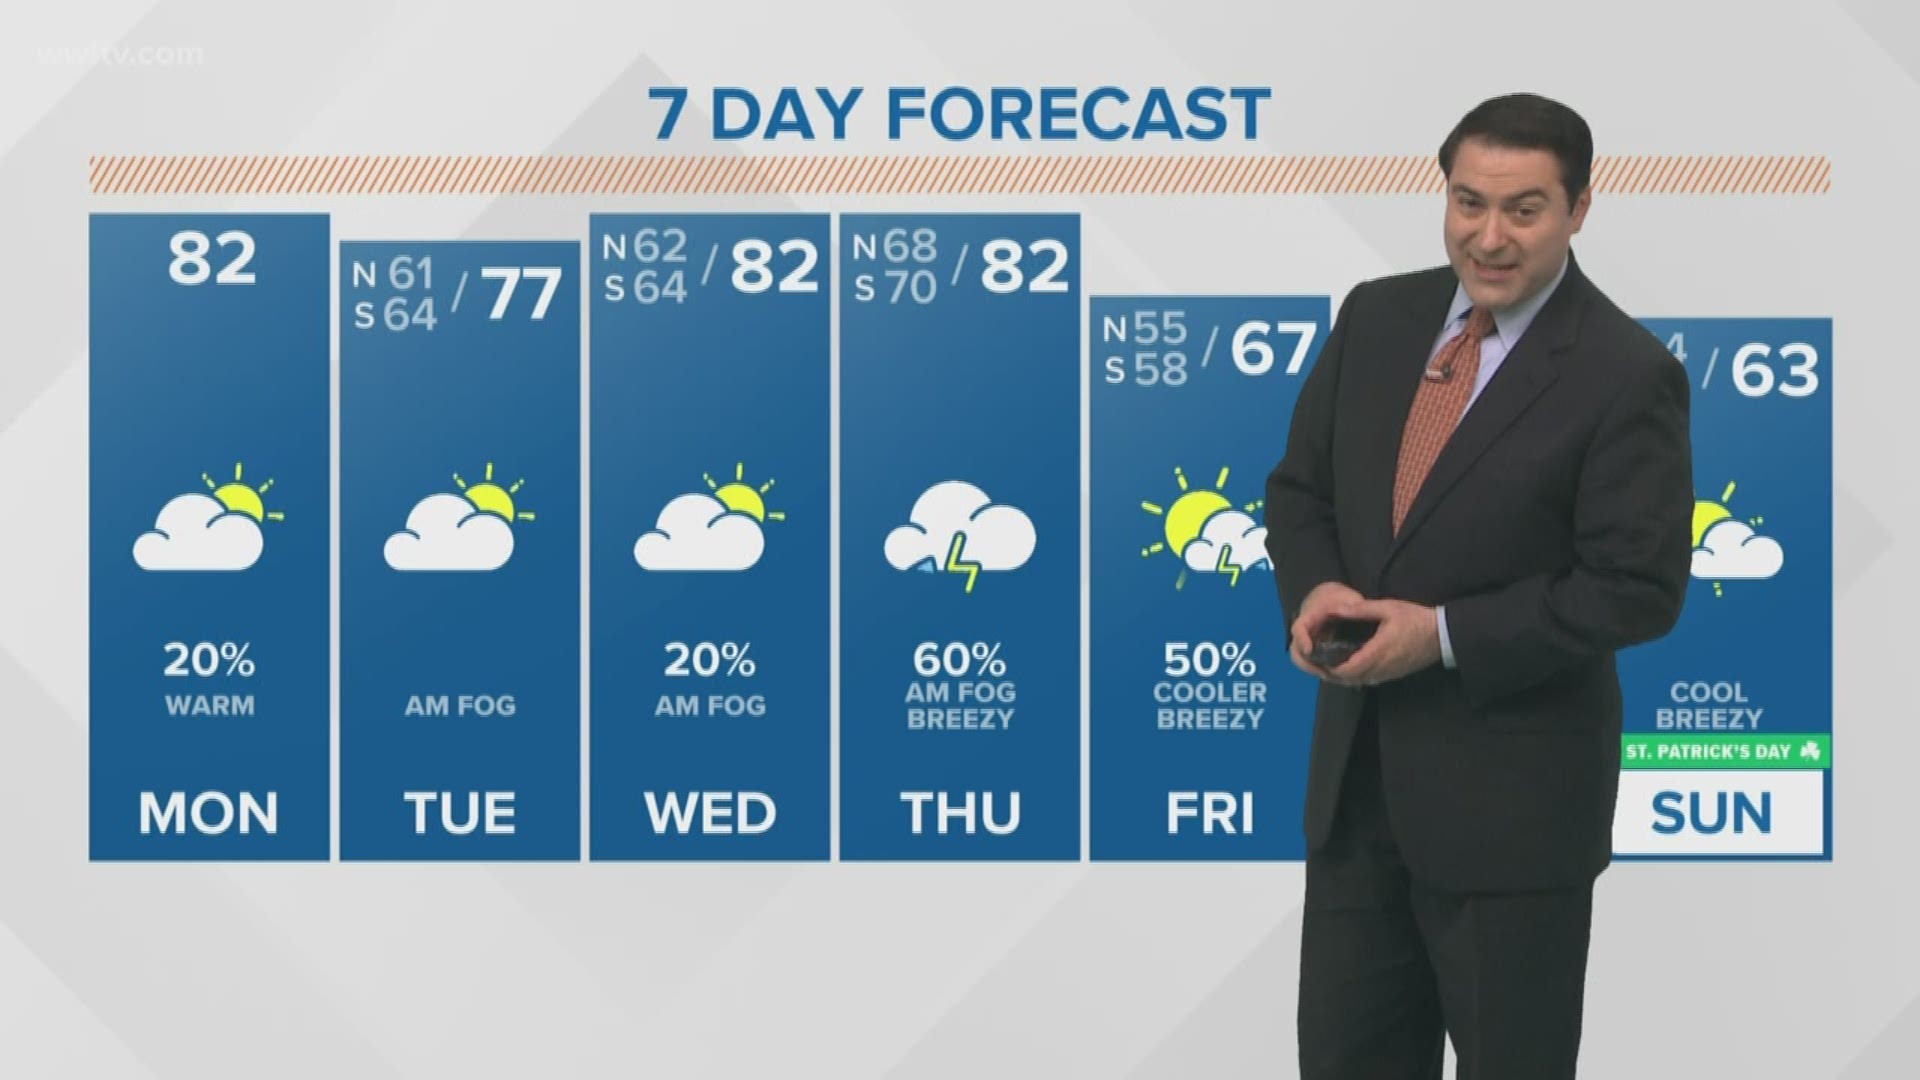 Meteorologist Dave Nussbaum says it will be a warm and humid day with a slight chance for a shower in New Orleans. Then we stay warm until the end of the week as a cold front moves through.